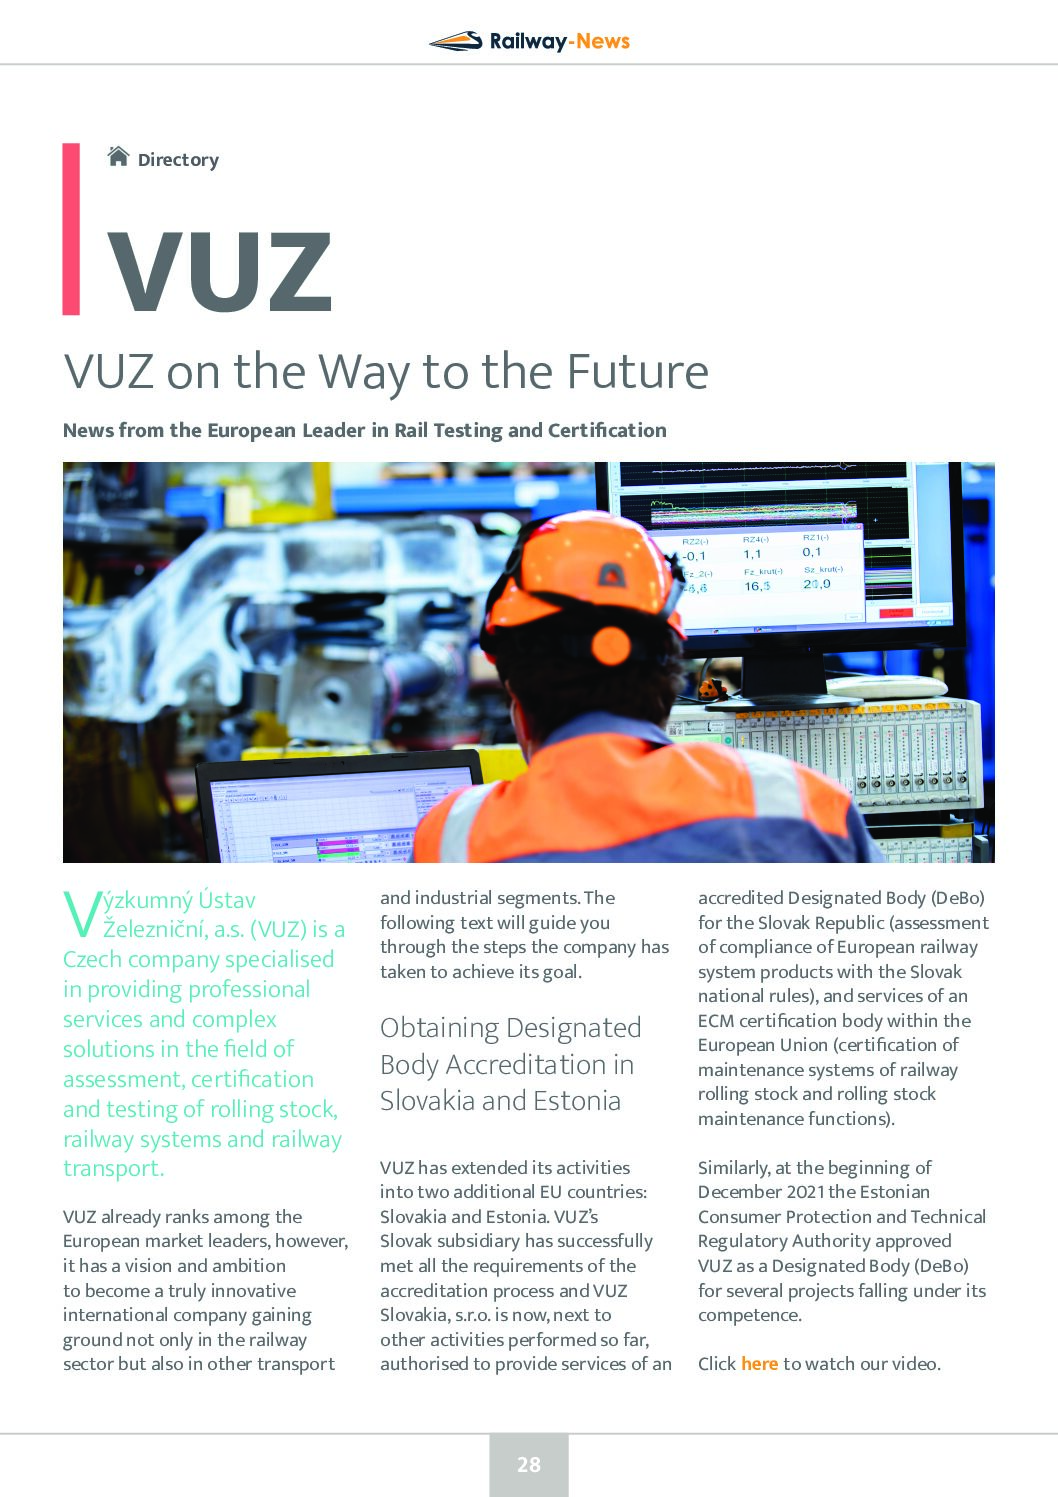 VUZ on the Way to the Future